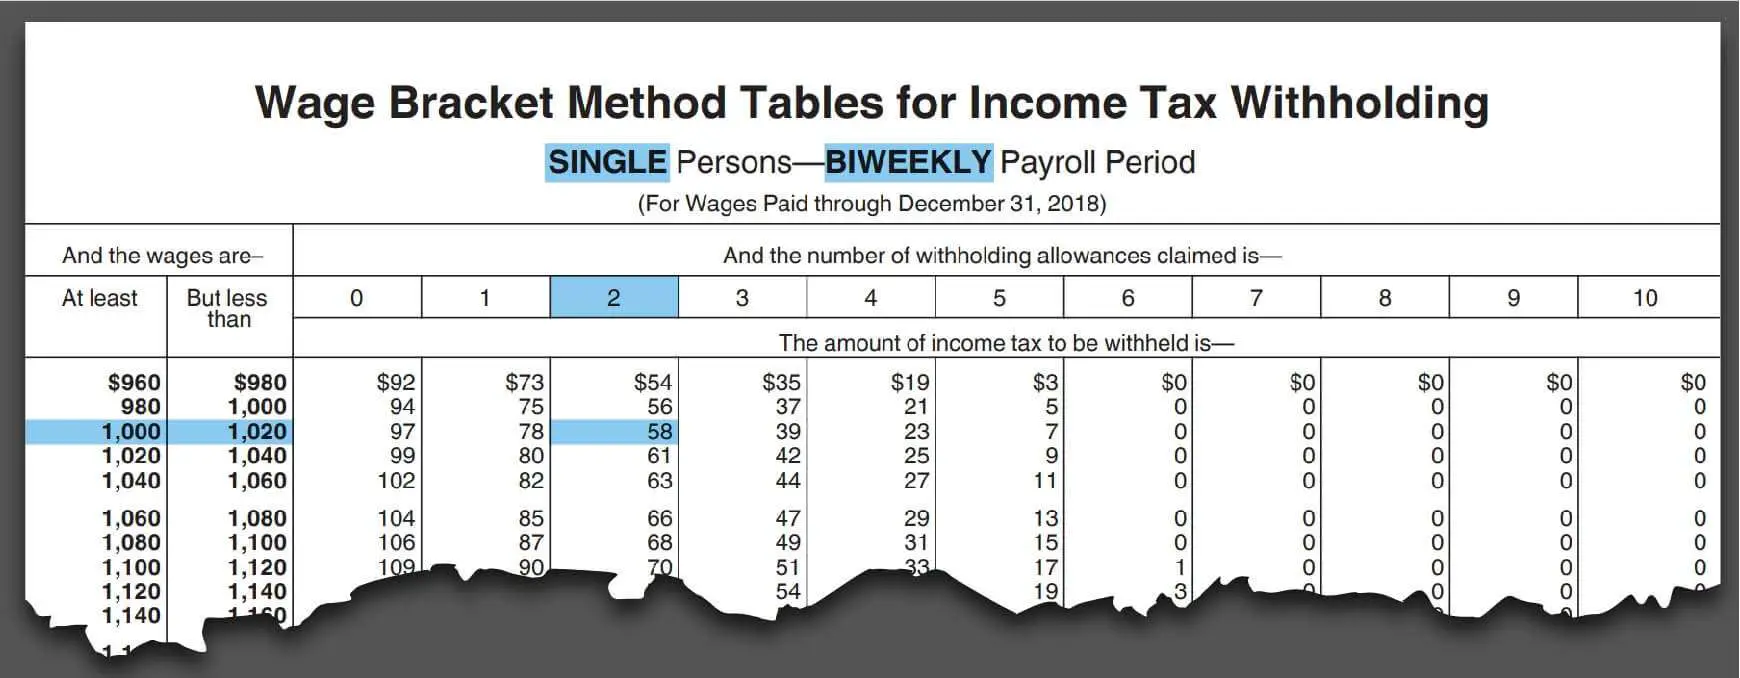 Federal Income Tax Withheld 2019